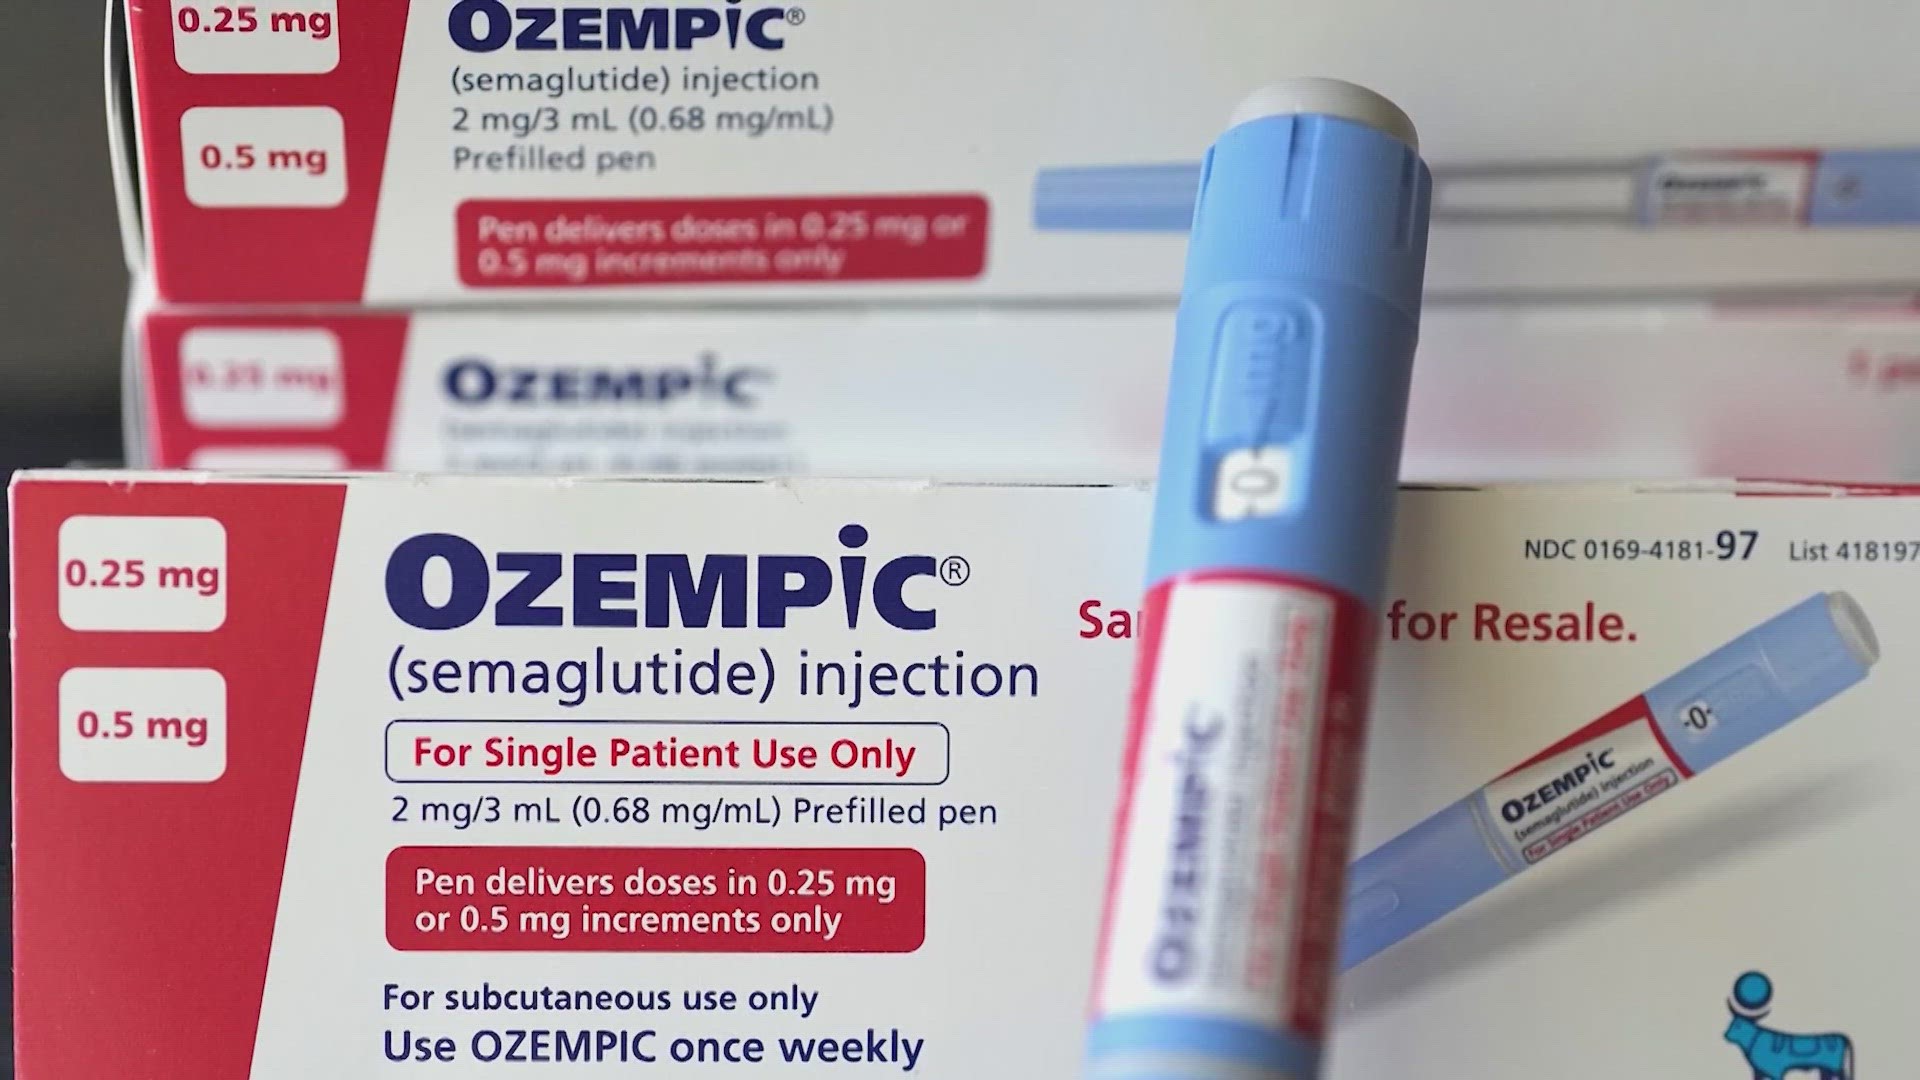 When we hear the drug names like Ozempic, we often think about how they can change a person’s body. But there are also psychological effects to consider